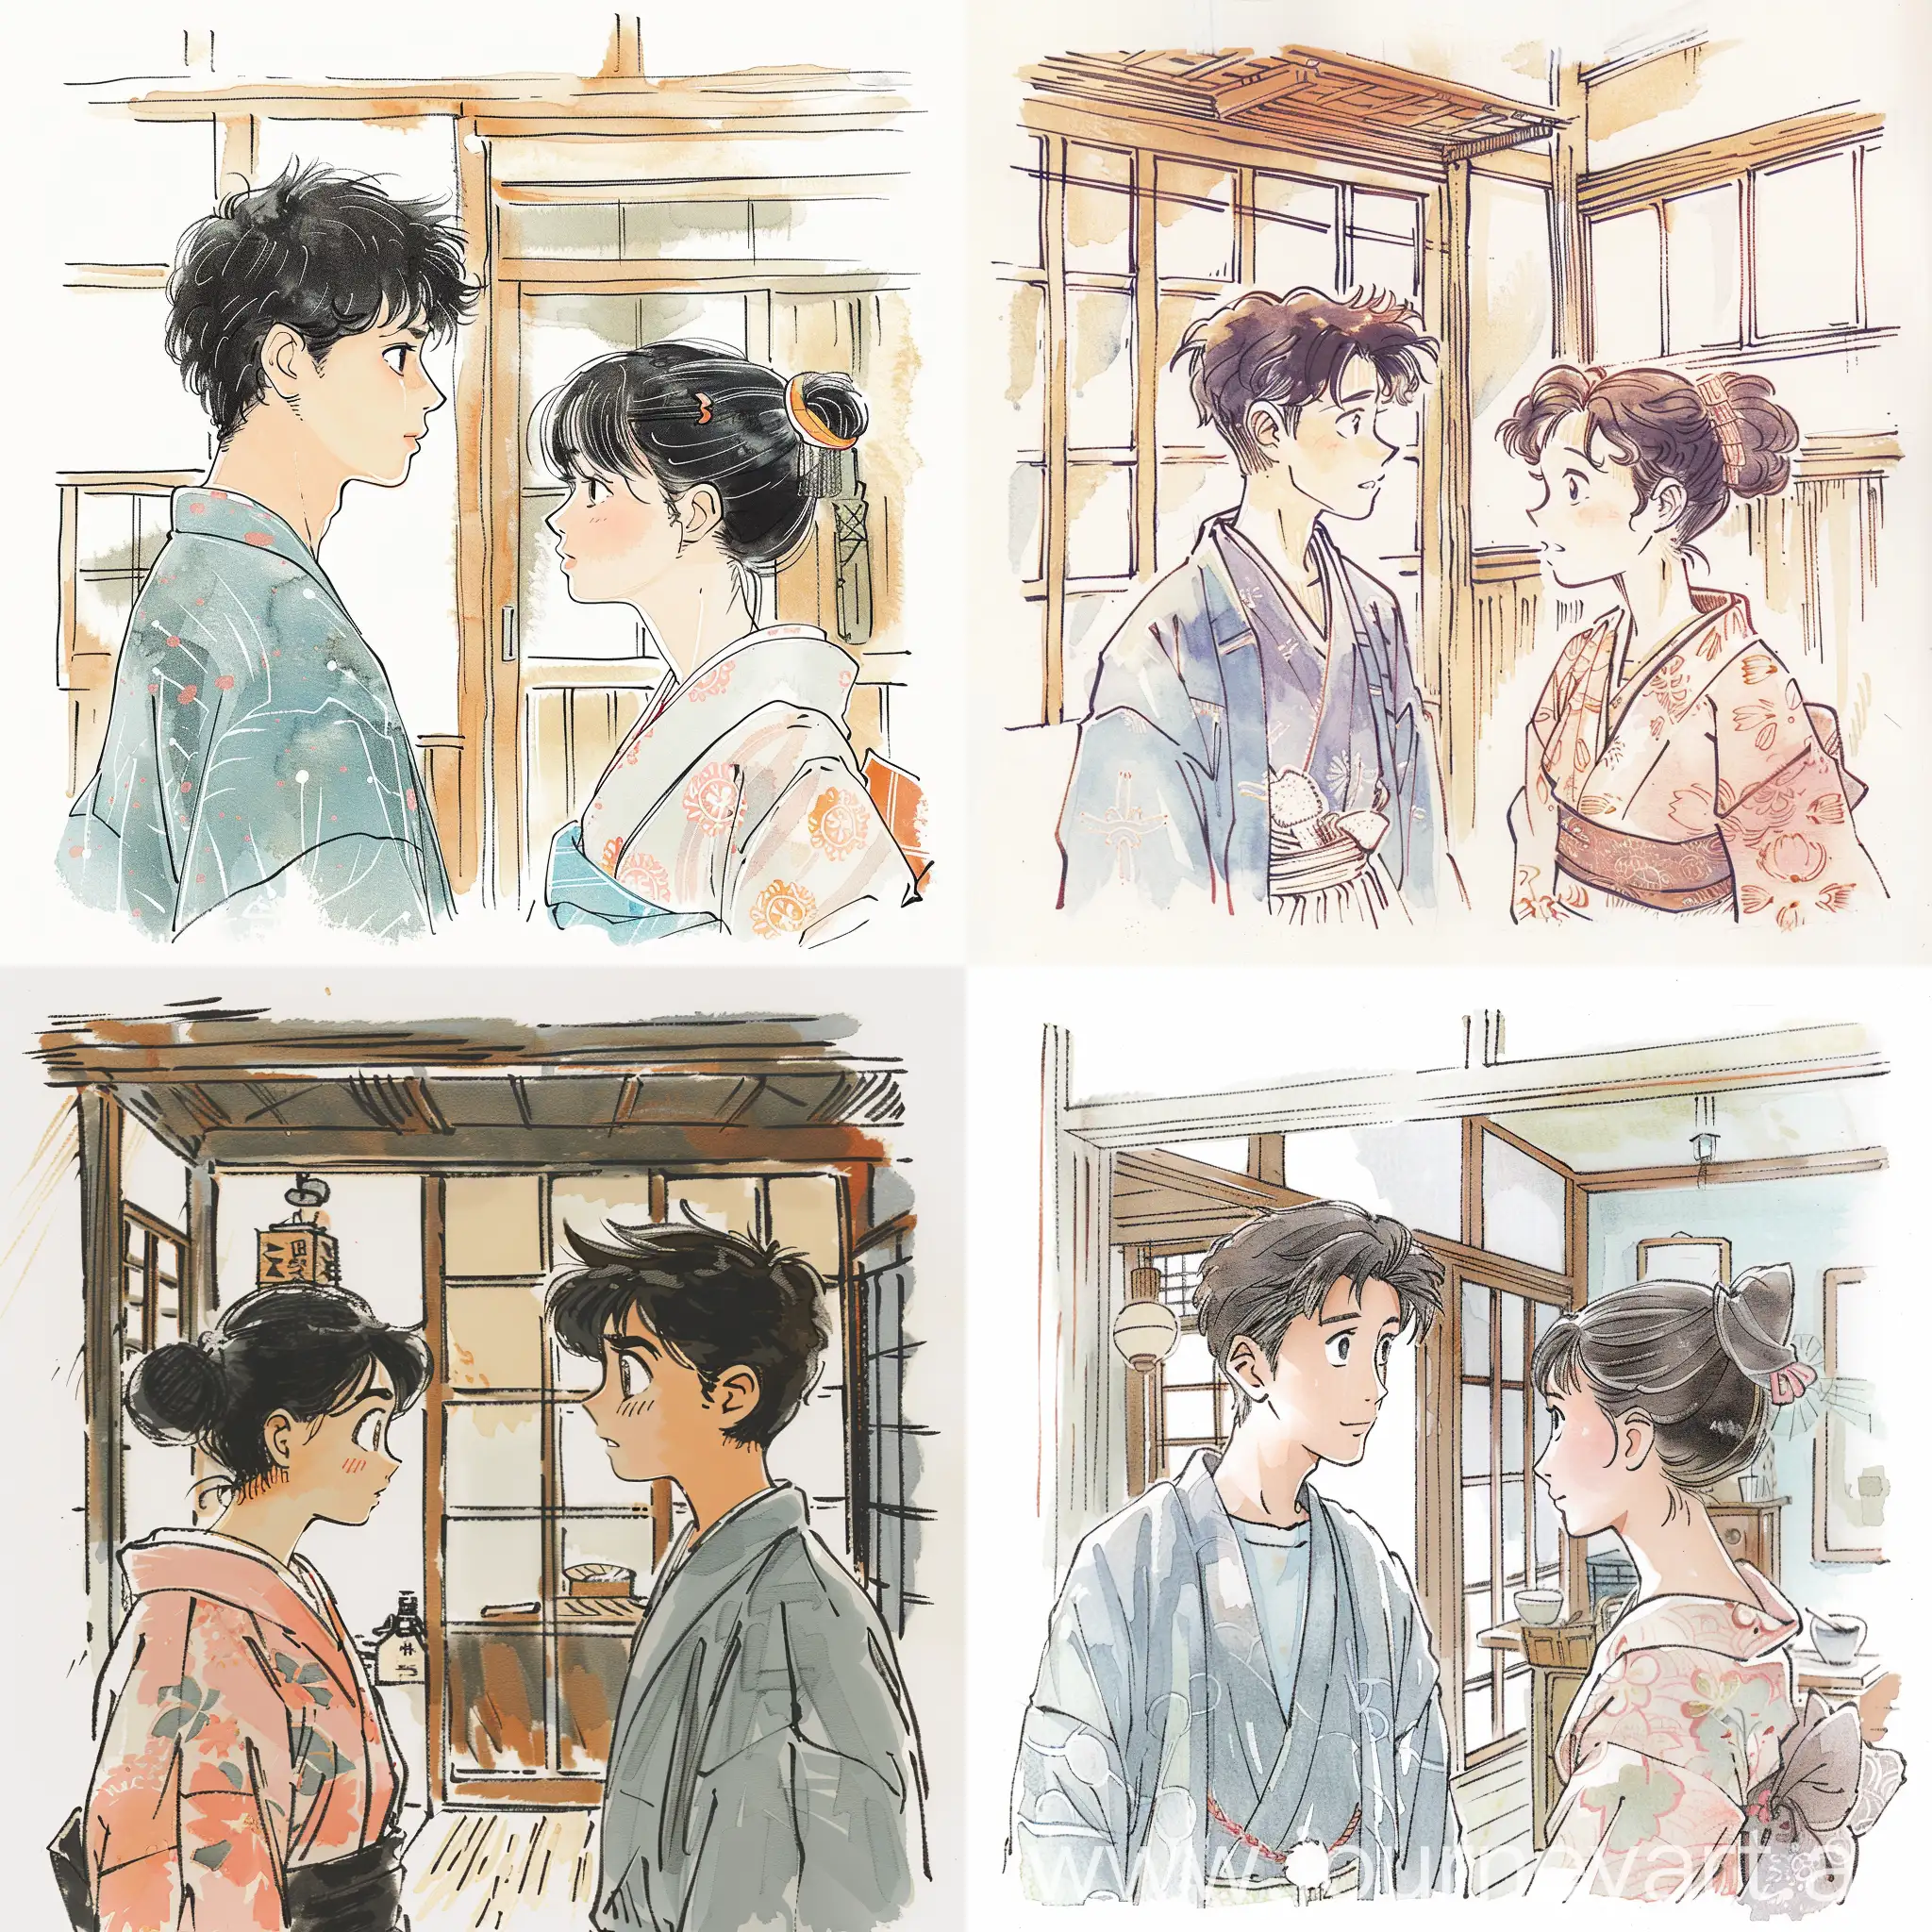 Edo-Era-Japanese-Home-Young-Man-and-Servant-Woman-in-Delicate-Watercolor-Style